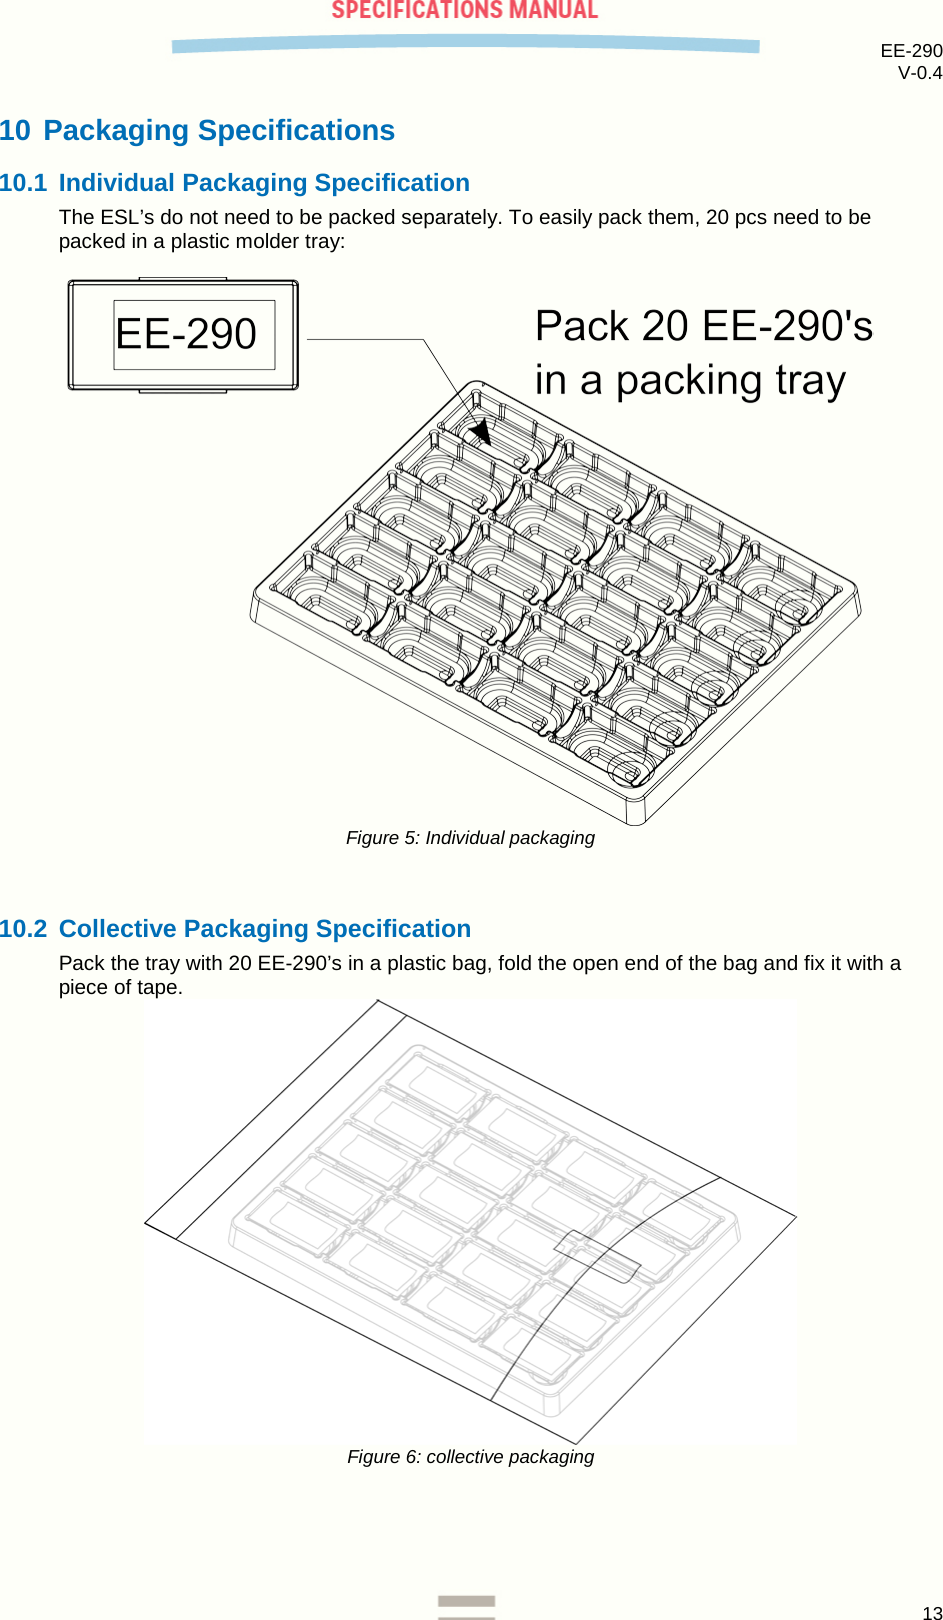 EE-290 V-0.4  10 Packaging Specifications 10.1 Individual Packaging Specification The ESL’s do not need to be packed separately. To easily pack them, 20 pcs need to be packed in a plastic molder tray:   Figure 5: Individual packaging  10.2 Collective Packaging Specification Pack the tray with 20 EE-290’s in a plastic bag, fold the open end of the bag and fix it with a piece of tape.  Figure 6: collective packaging    13  